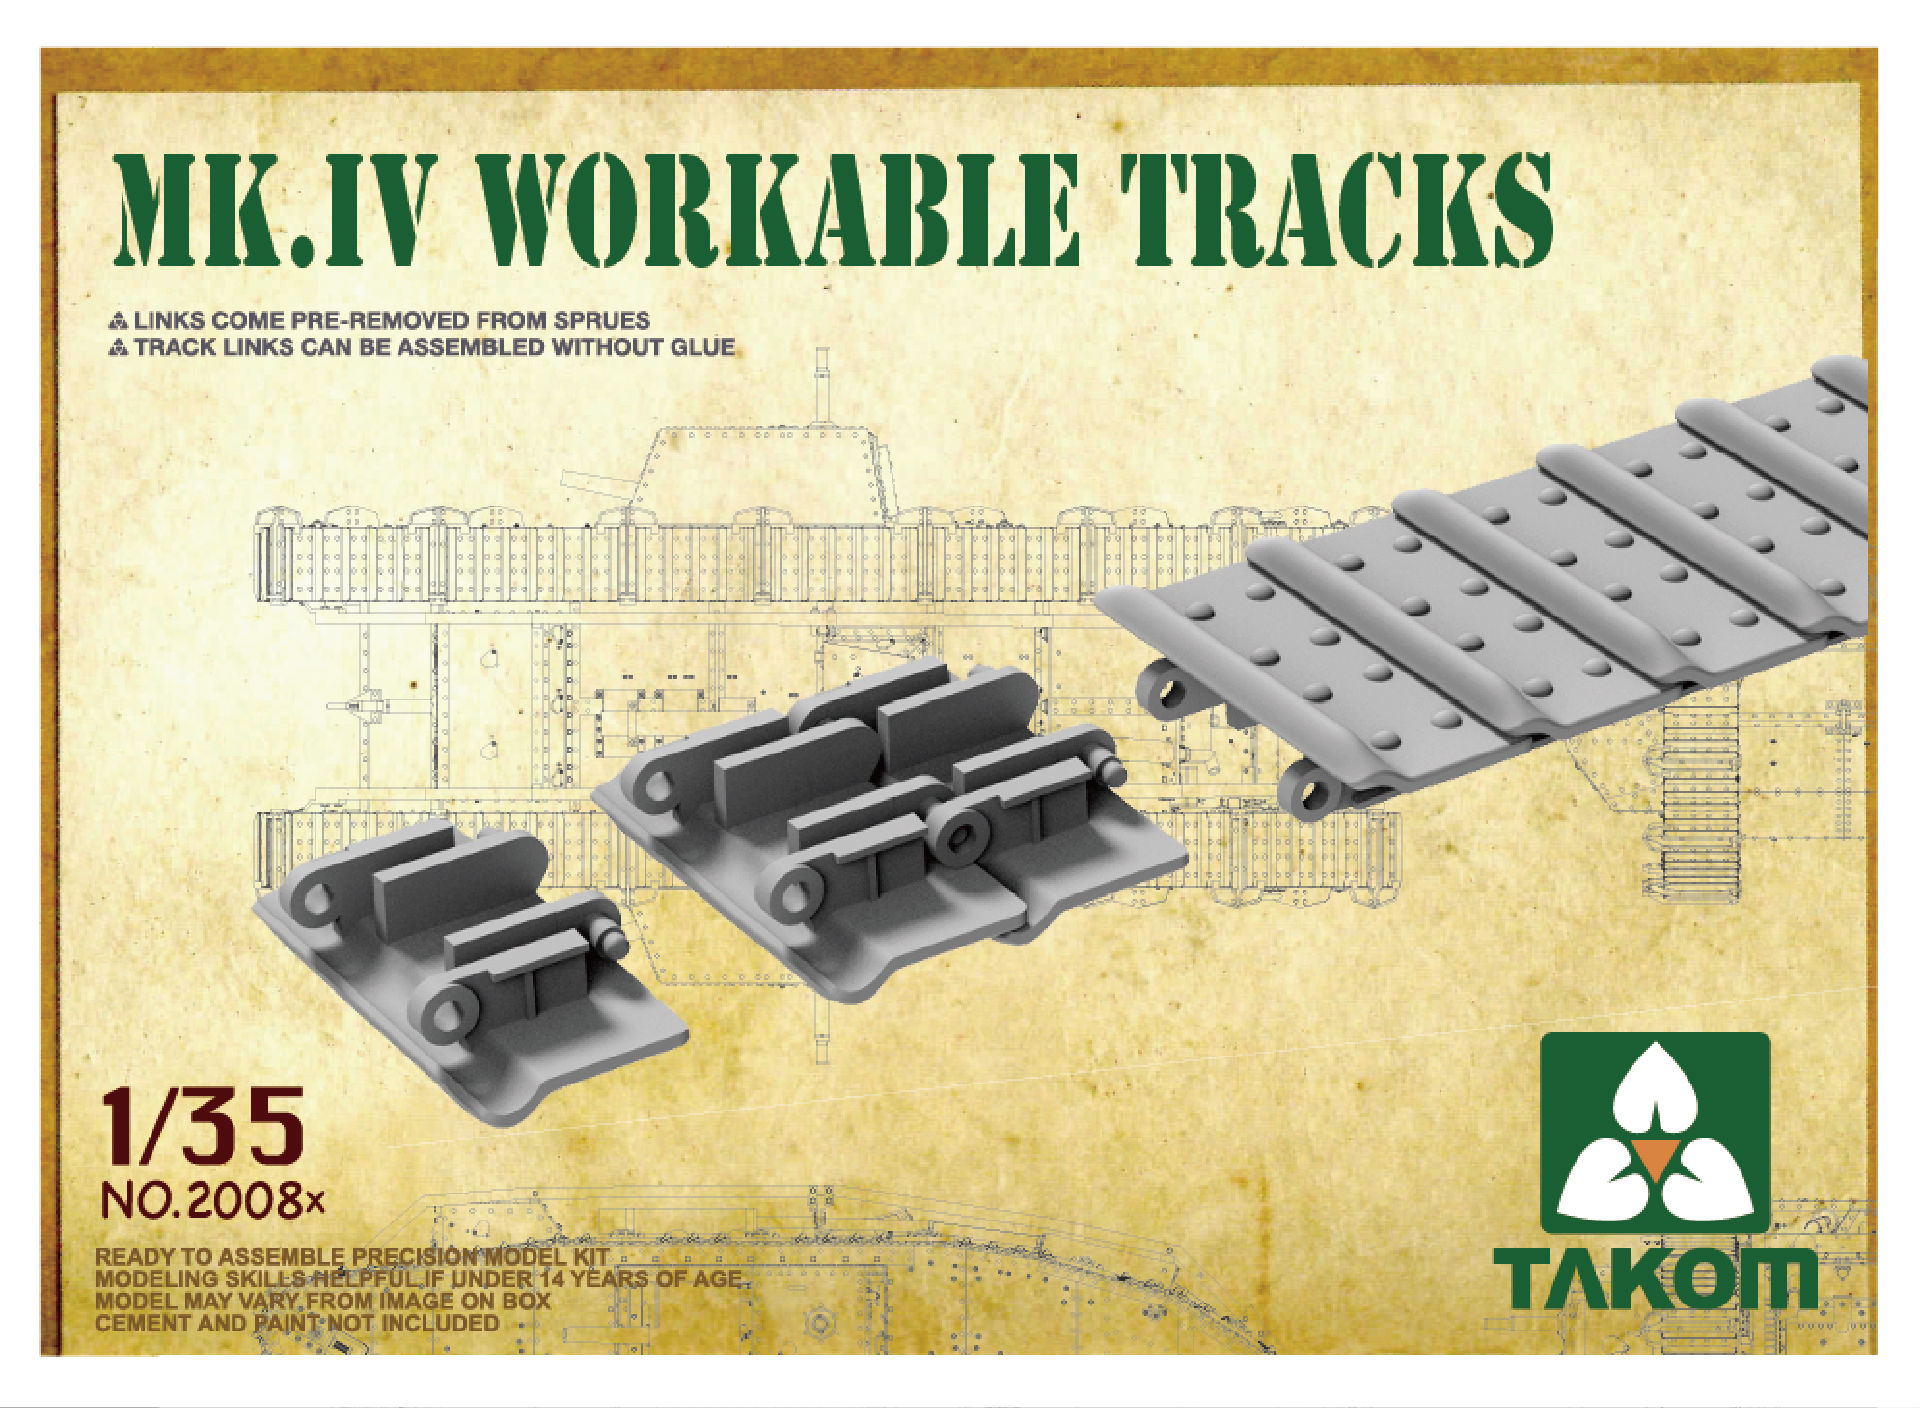 Mark IV Workable Tracks (Cement-free)